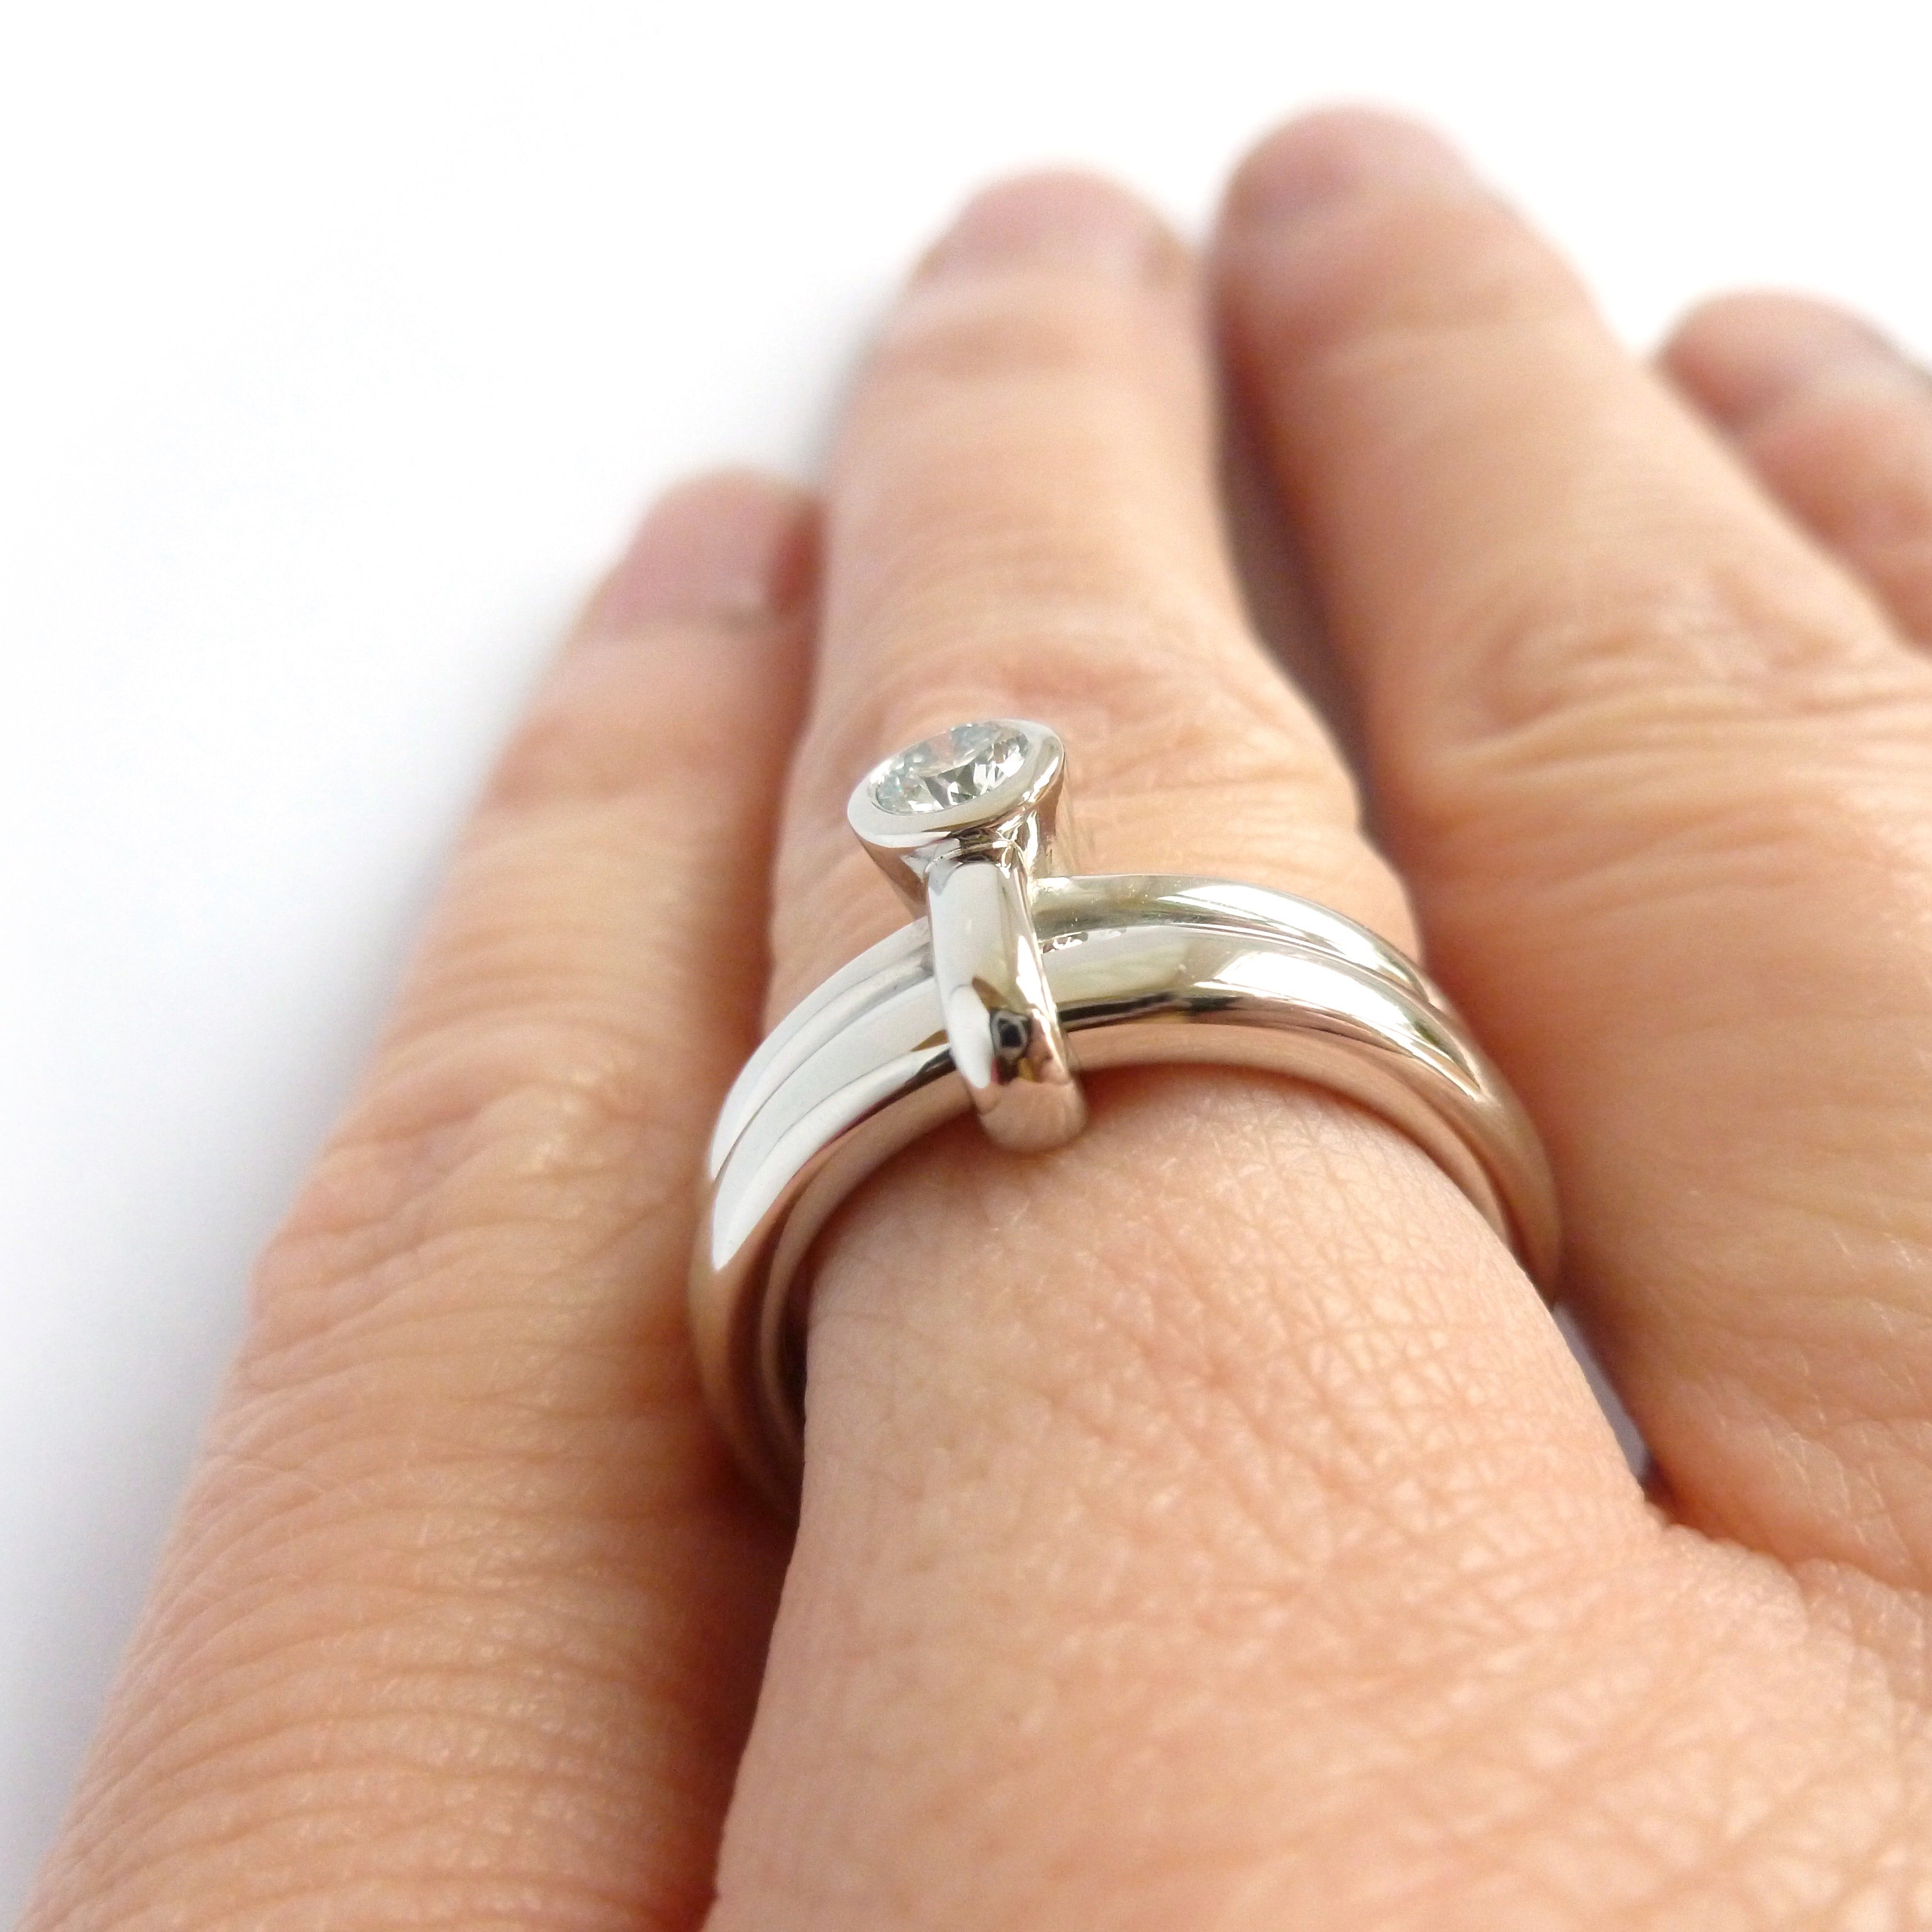 Chunky heavy weight modern eternity two band stacking ring set, handmade in platinum and diamond. Multi band ring or interlocking ring, sometimes called double band ring too.